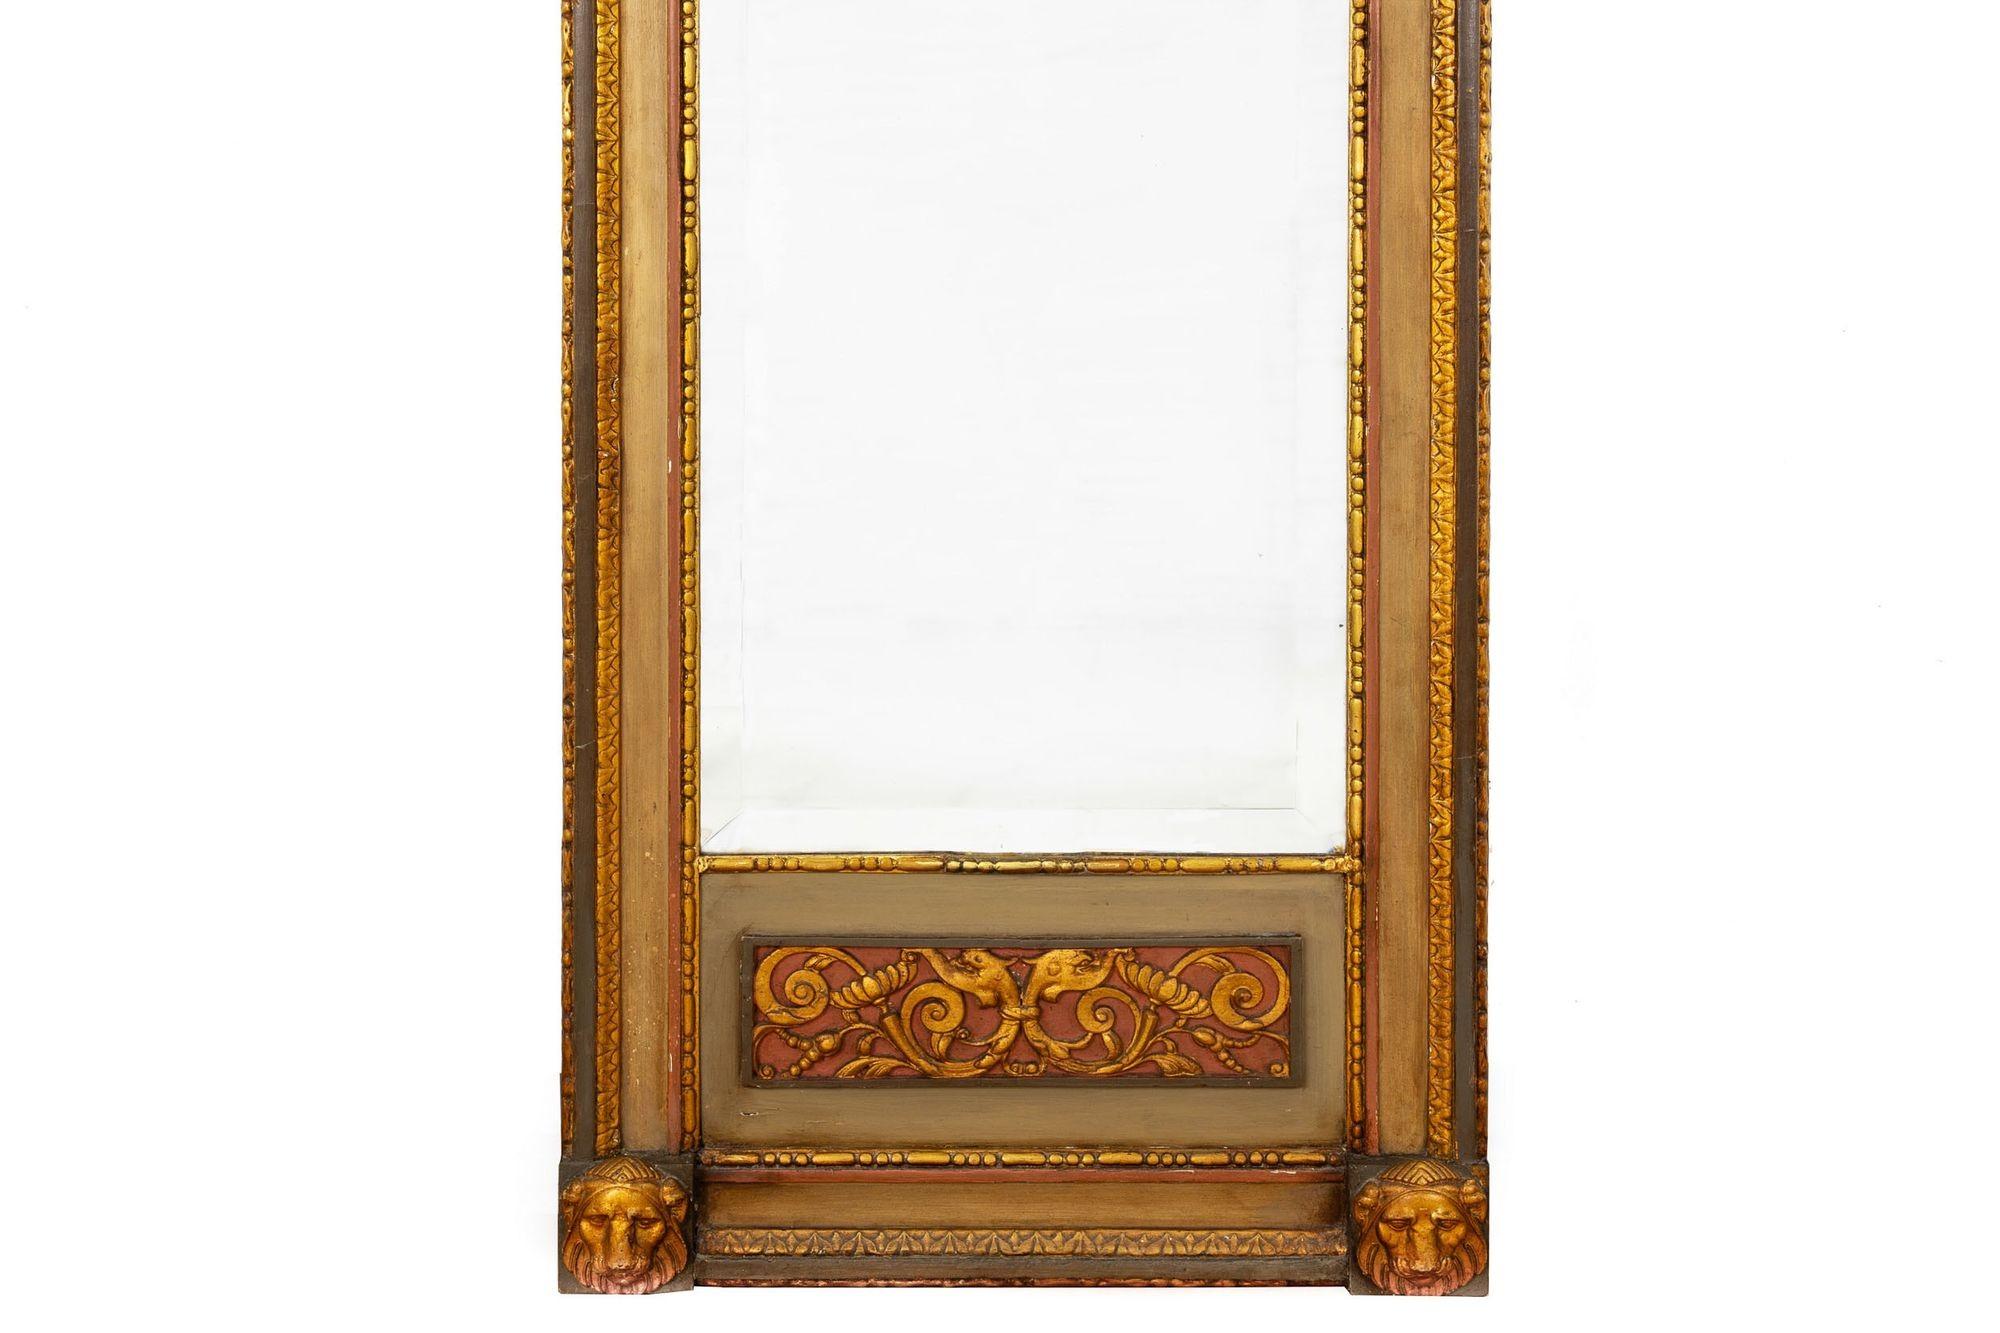 Northern European Neoclassical Painted Antique Pier Mirror, 19th Century In Good Condition For Sale In Shippensburg, PA